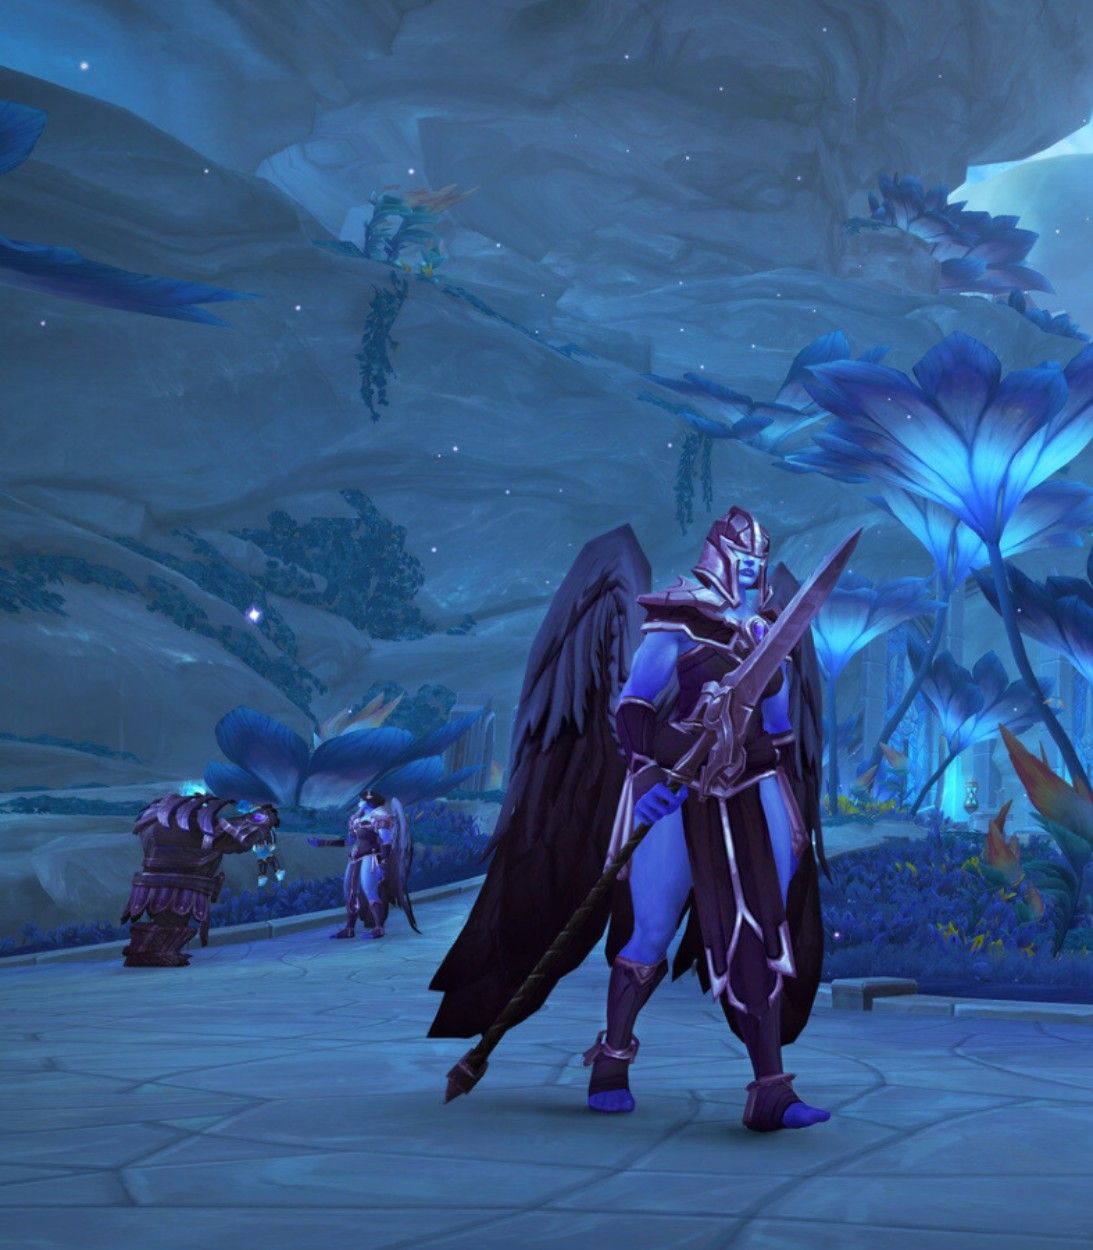 A player character raises their sword in World of Warcraft: Shadowlands